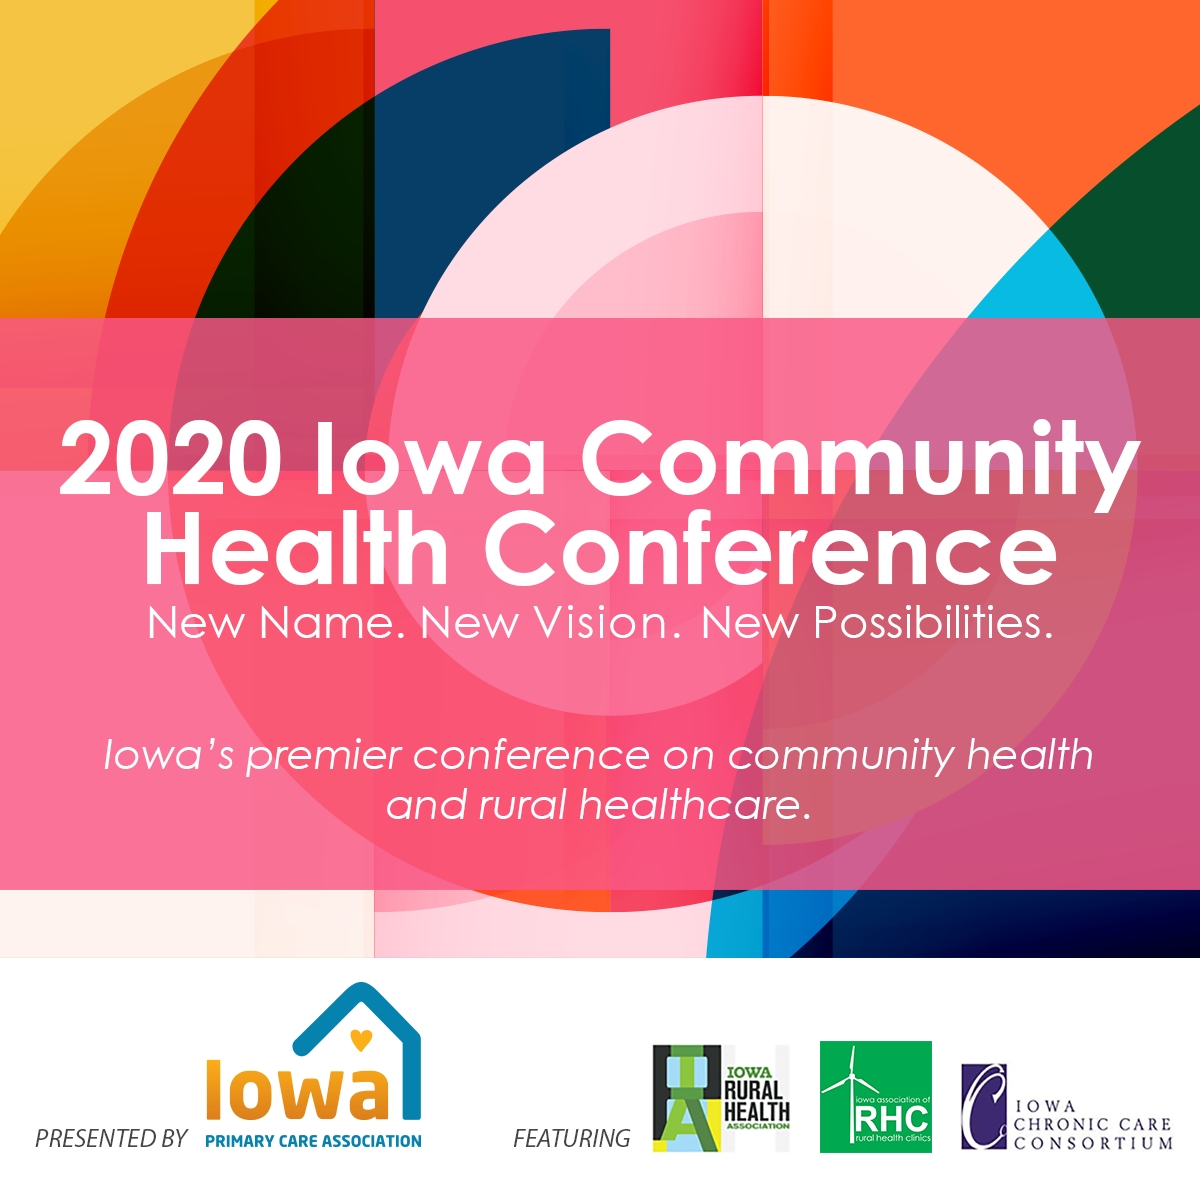 Five Iowans Honored for Contributions to Community Health at Iowa Community Health Conference